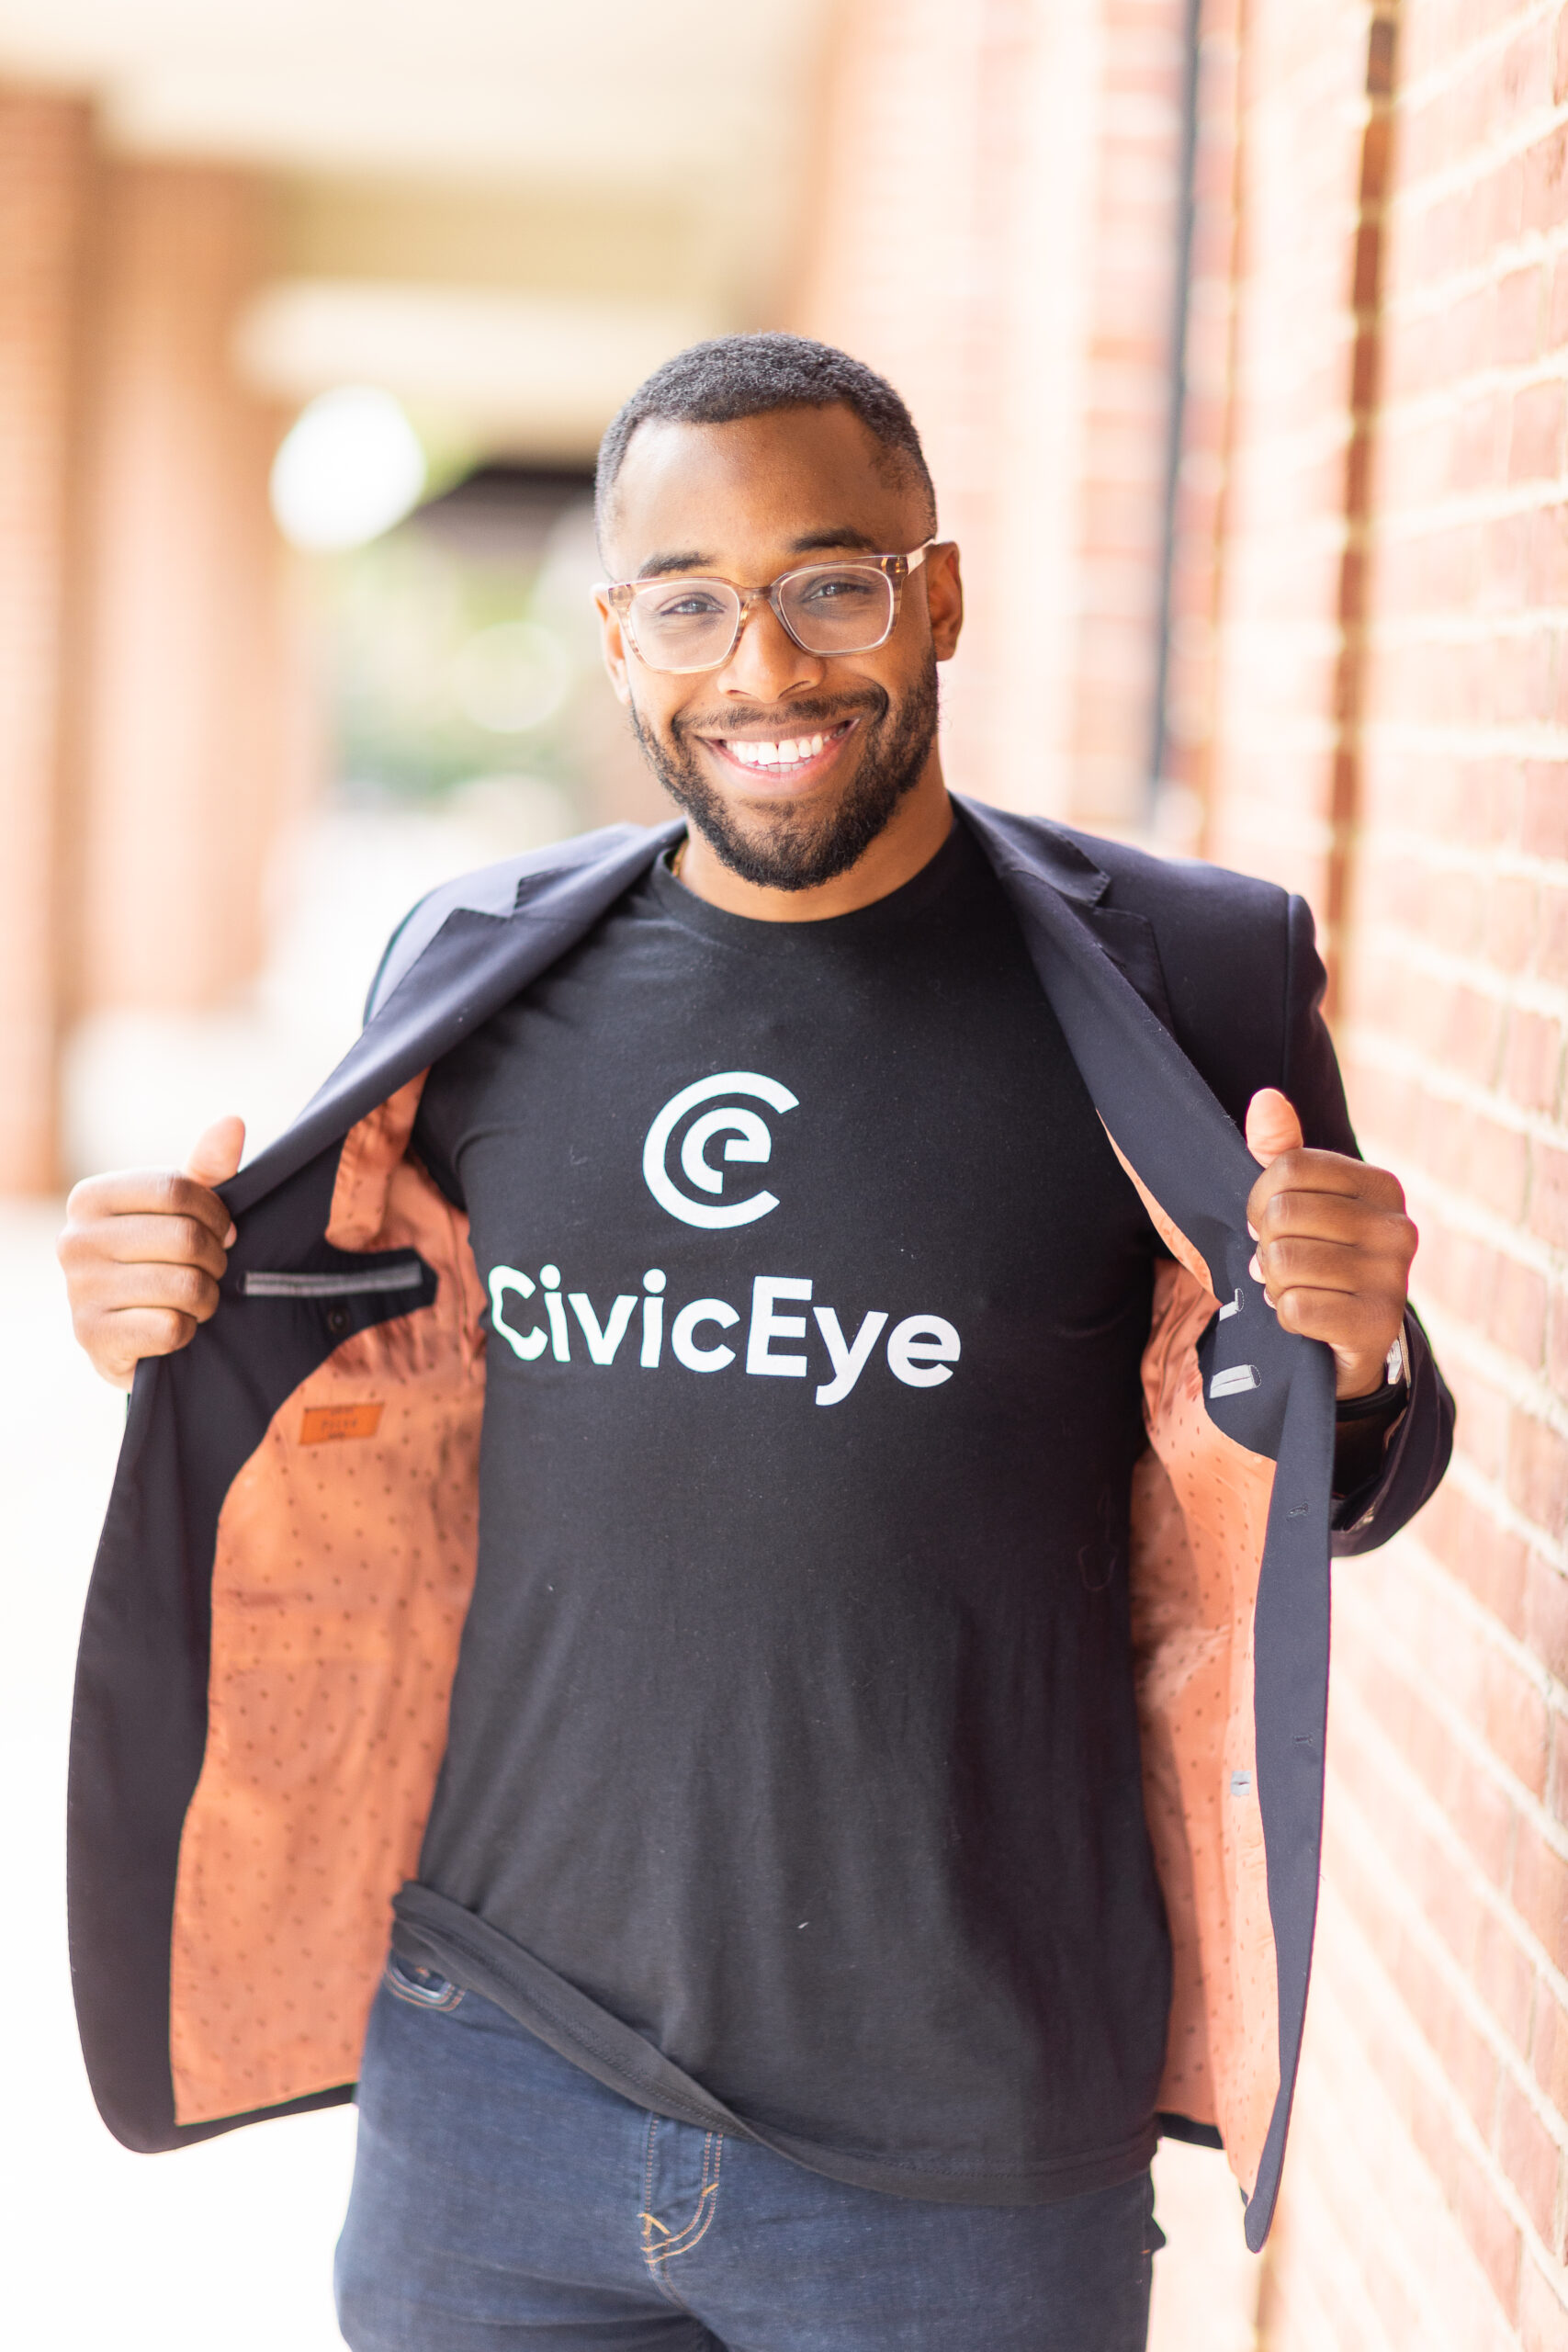 Portrait of Terrence Pruitt in CivicEye t-shirt